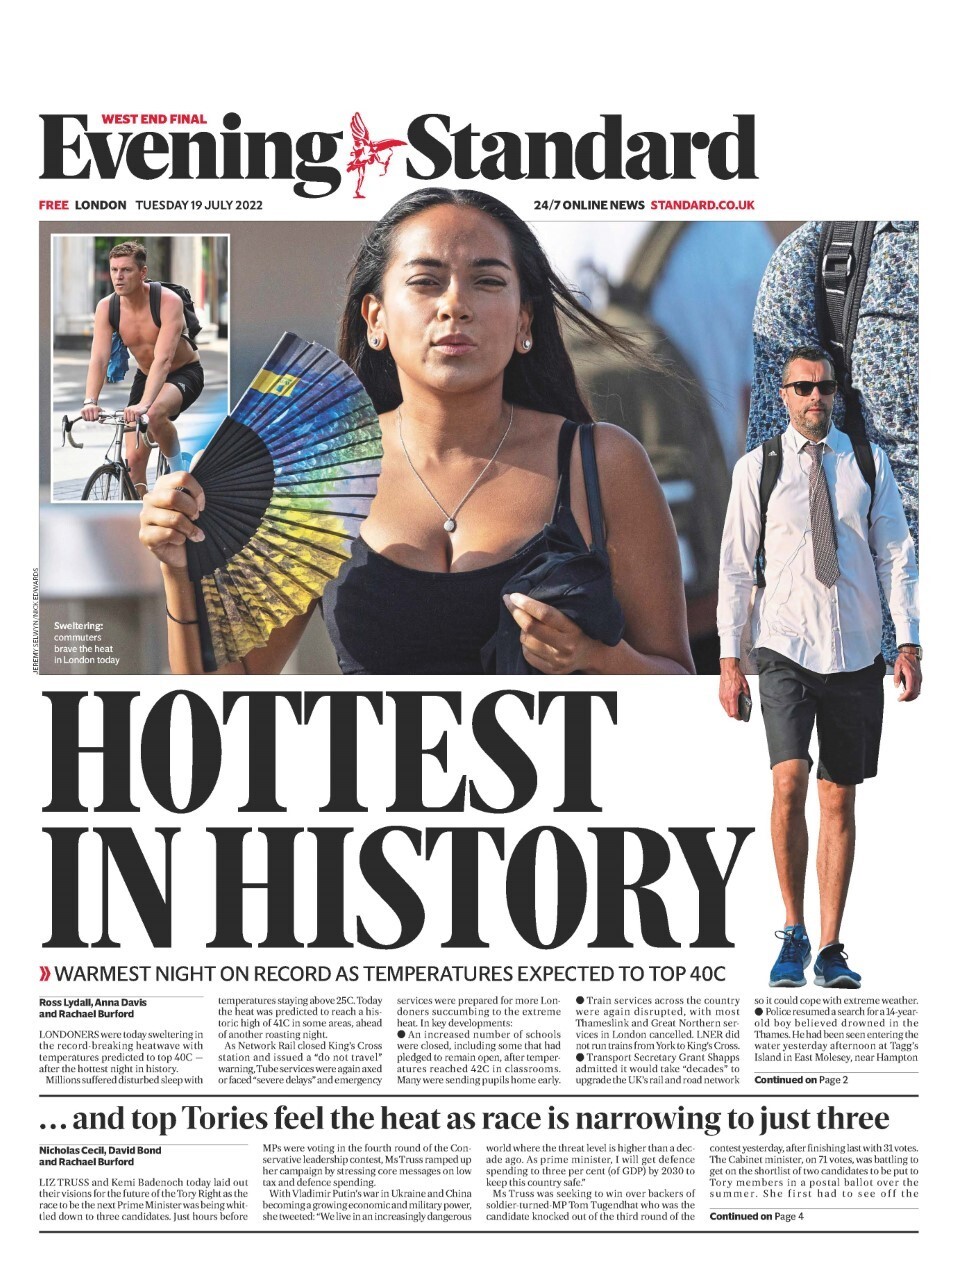 A newspaper frontpage says hottest in history.